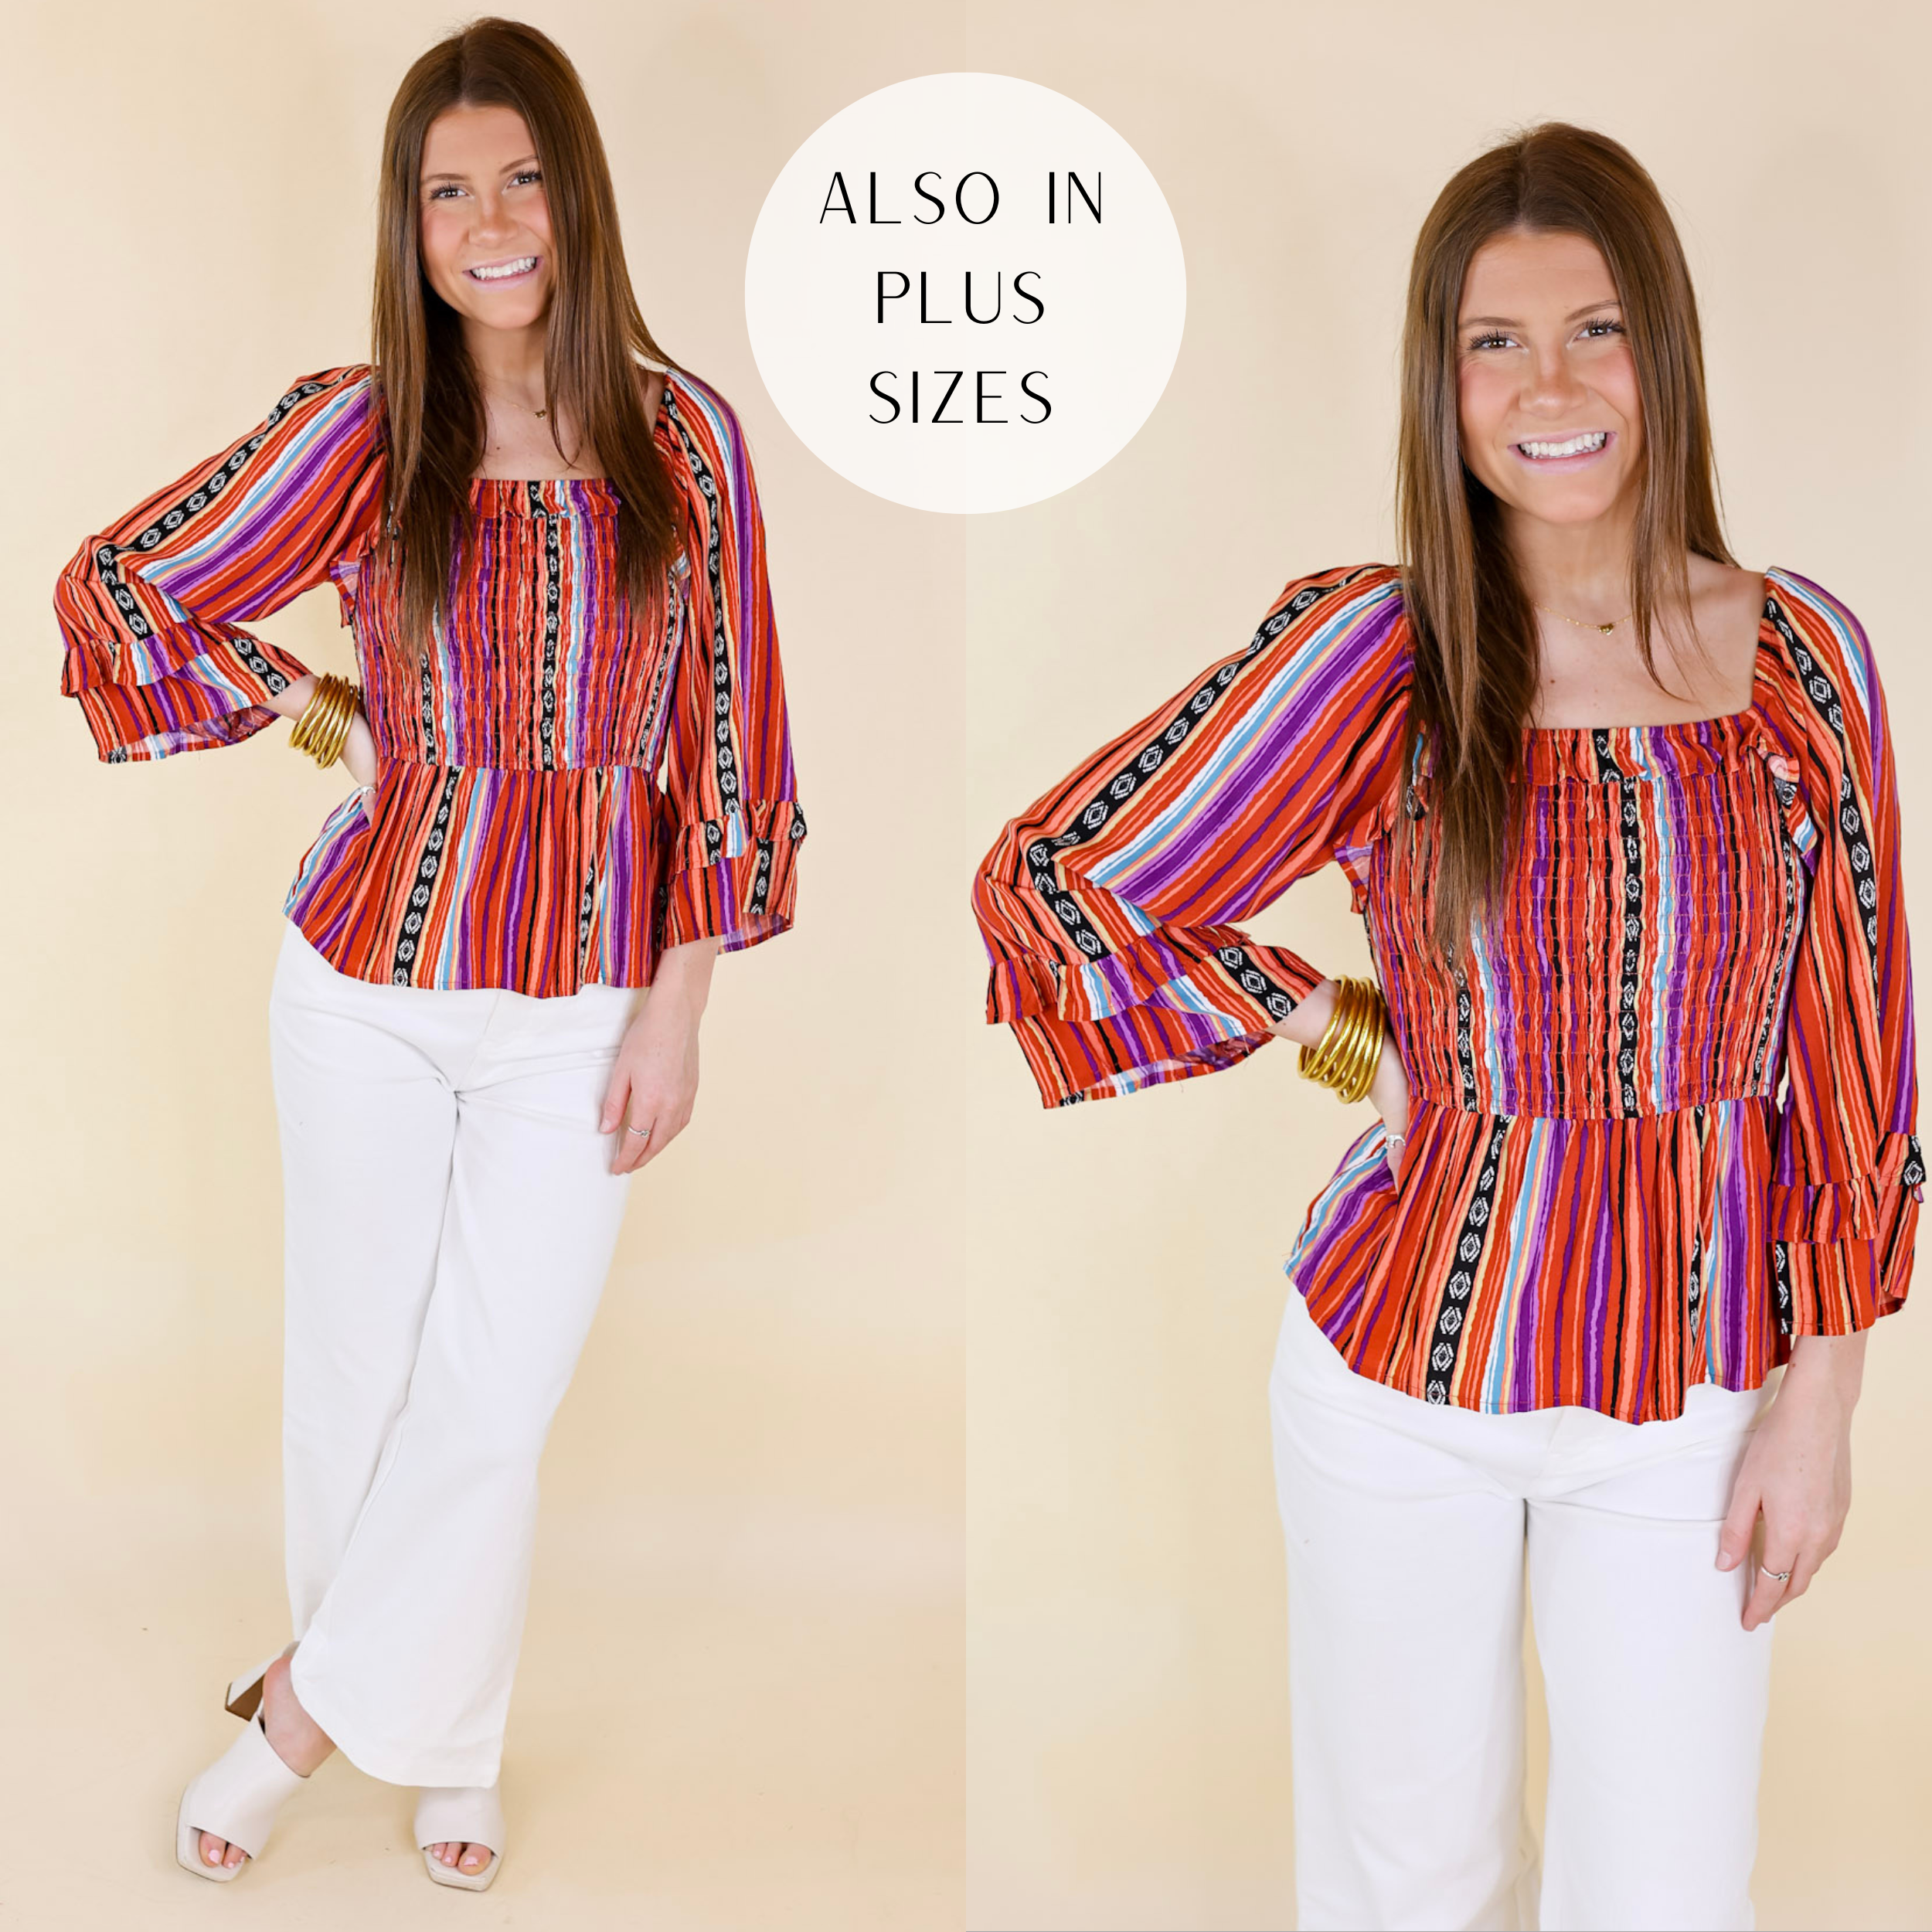 Model is wearing a serape print peplum top with a smocked bodice and 3/4 sleeves. Model has it paired with white heels, white jeans, and gold jewelry.